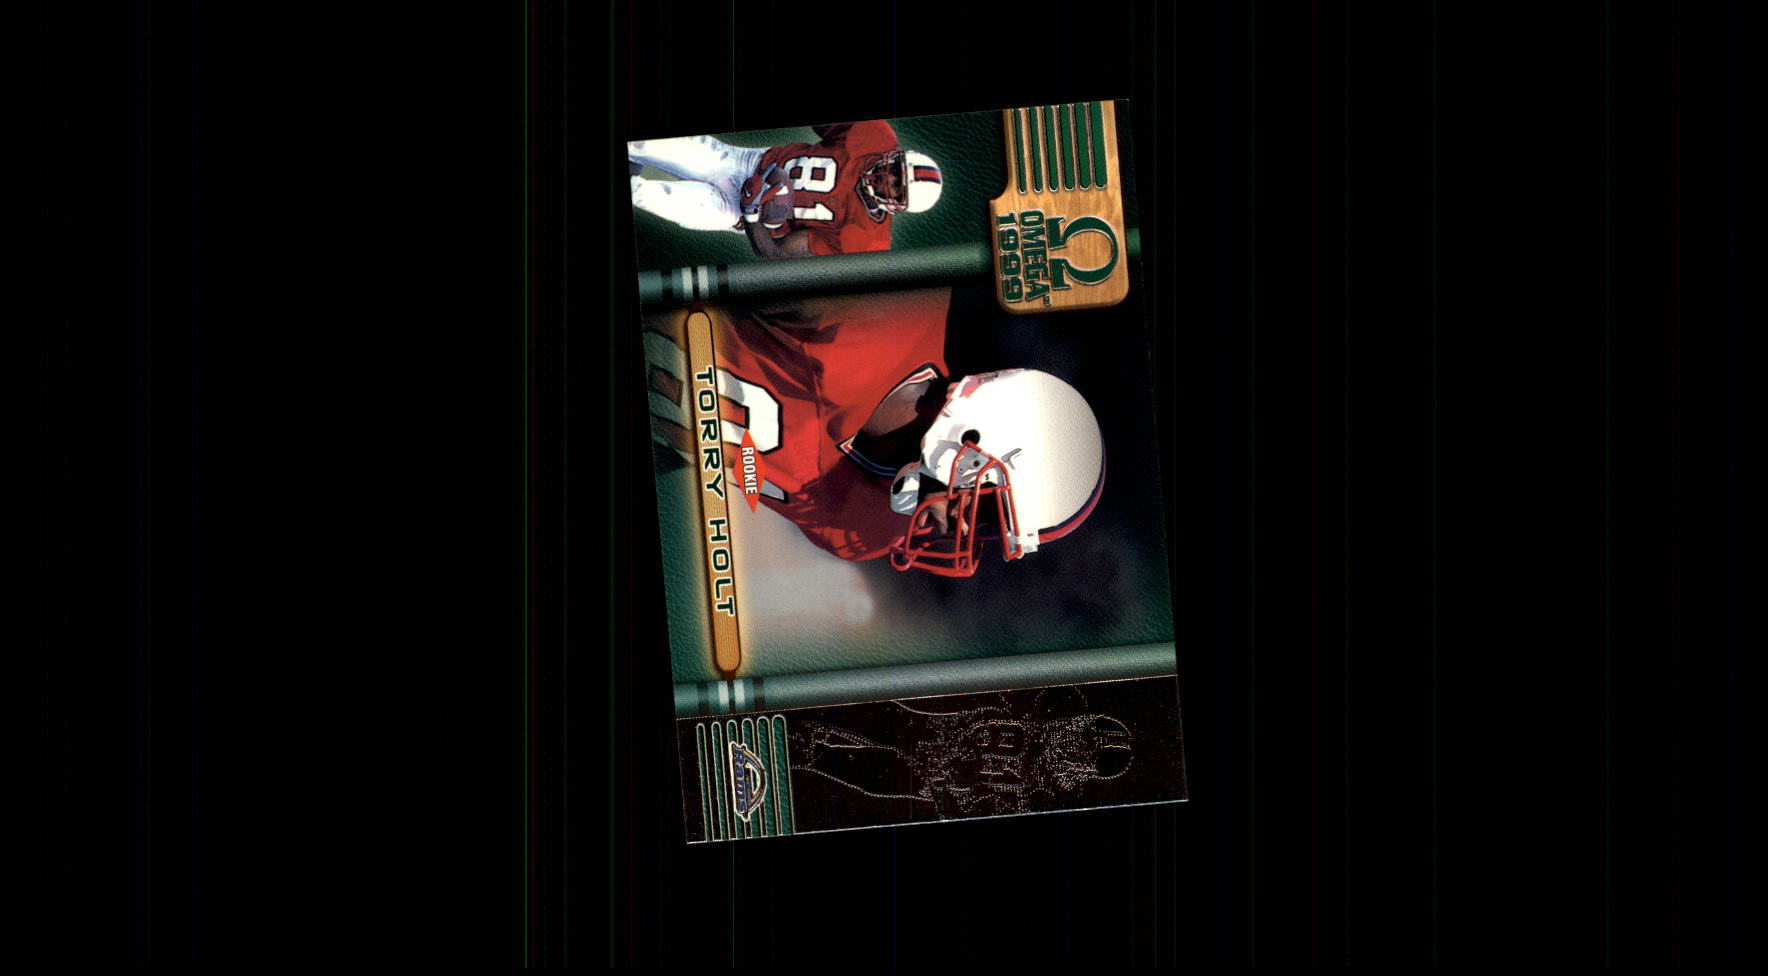 1999 Pacific Omega #223 Torry Holt RC